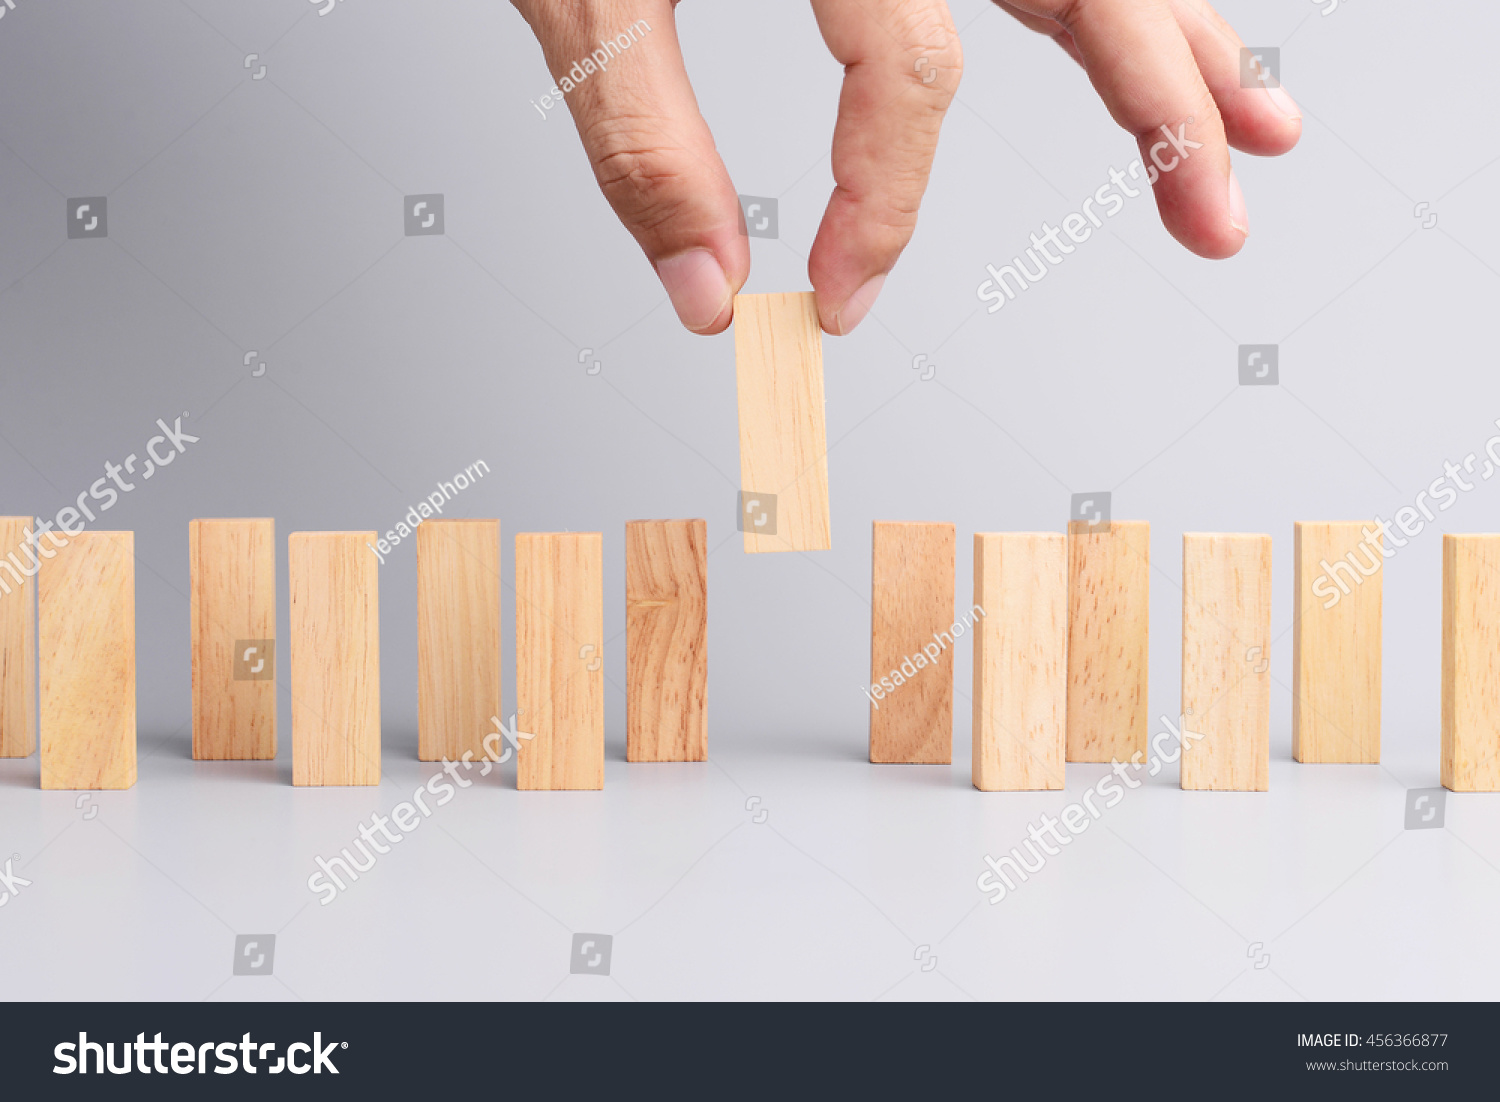 Man hand pick one of wood block from many wood block in row, metaphor to business concept in choose ideal person from many candidate. Gray background, side view. #456366877